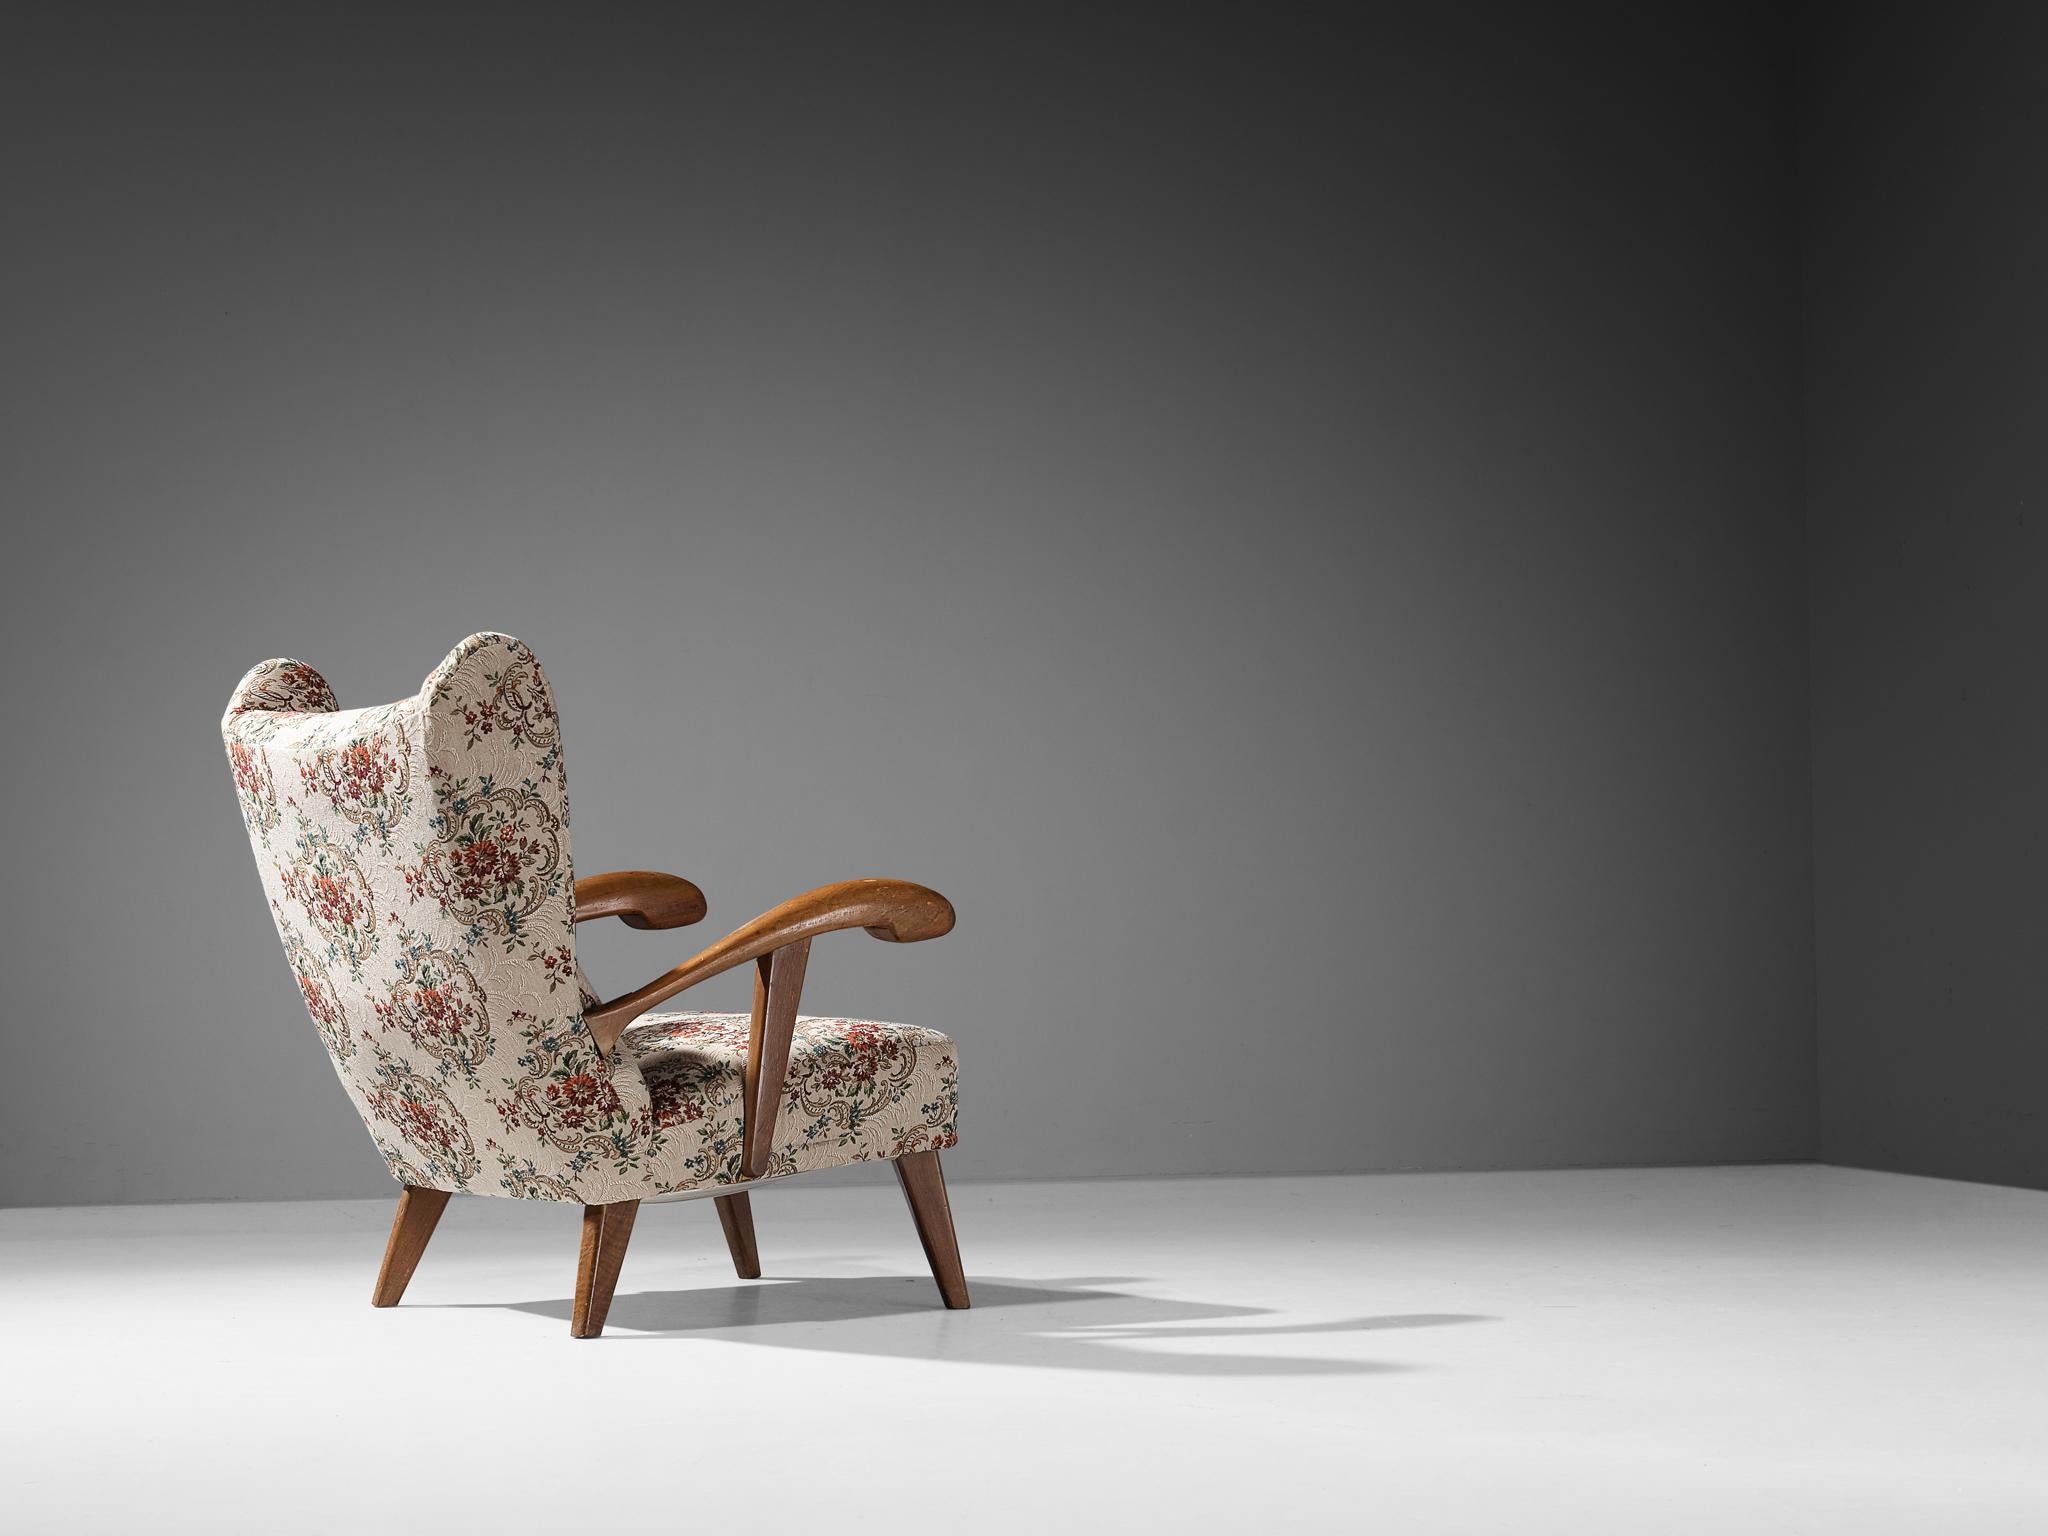 Lounge chair, stained beech, fabric, Czech Republic, 1950s. 

This beautifully designed lounge chair holds a striking construction by means of the sculpted elements discernible in the wooden frame and back. The armrests are characterized by curved,